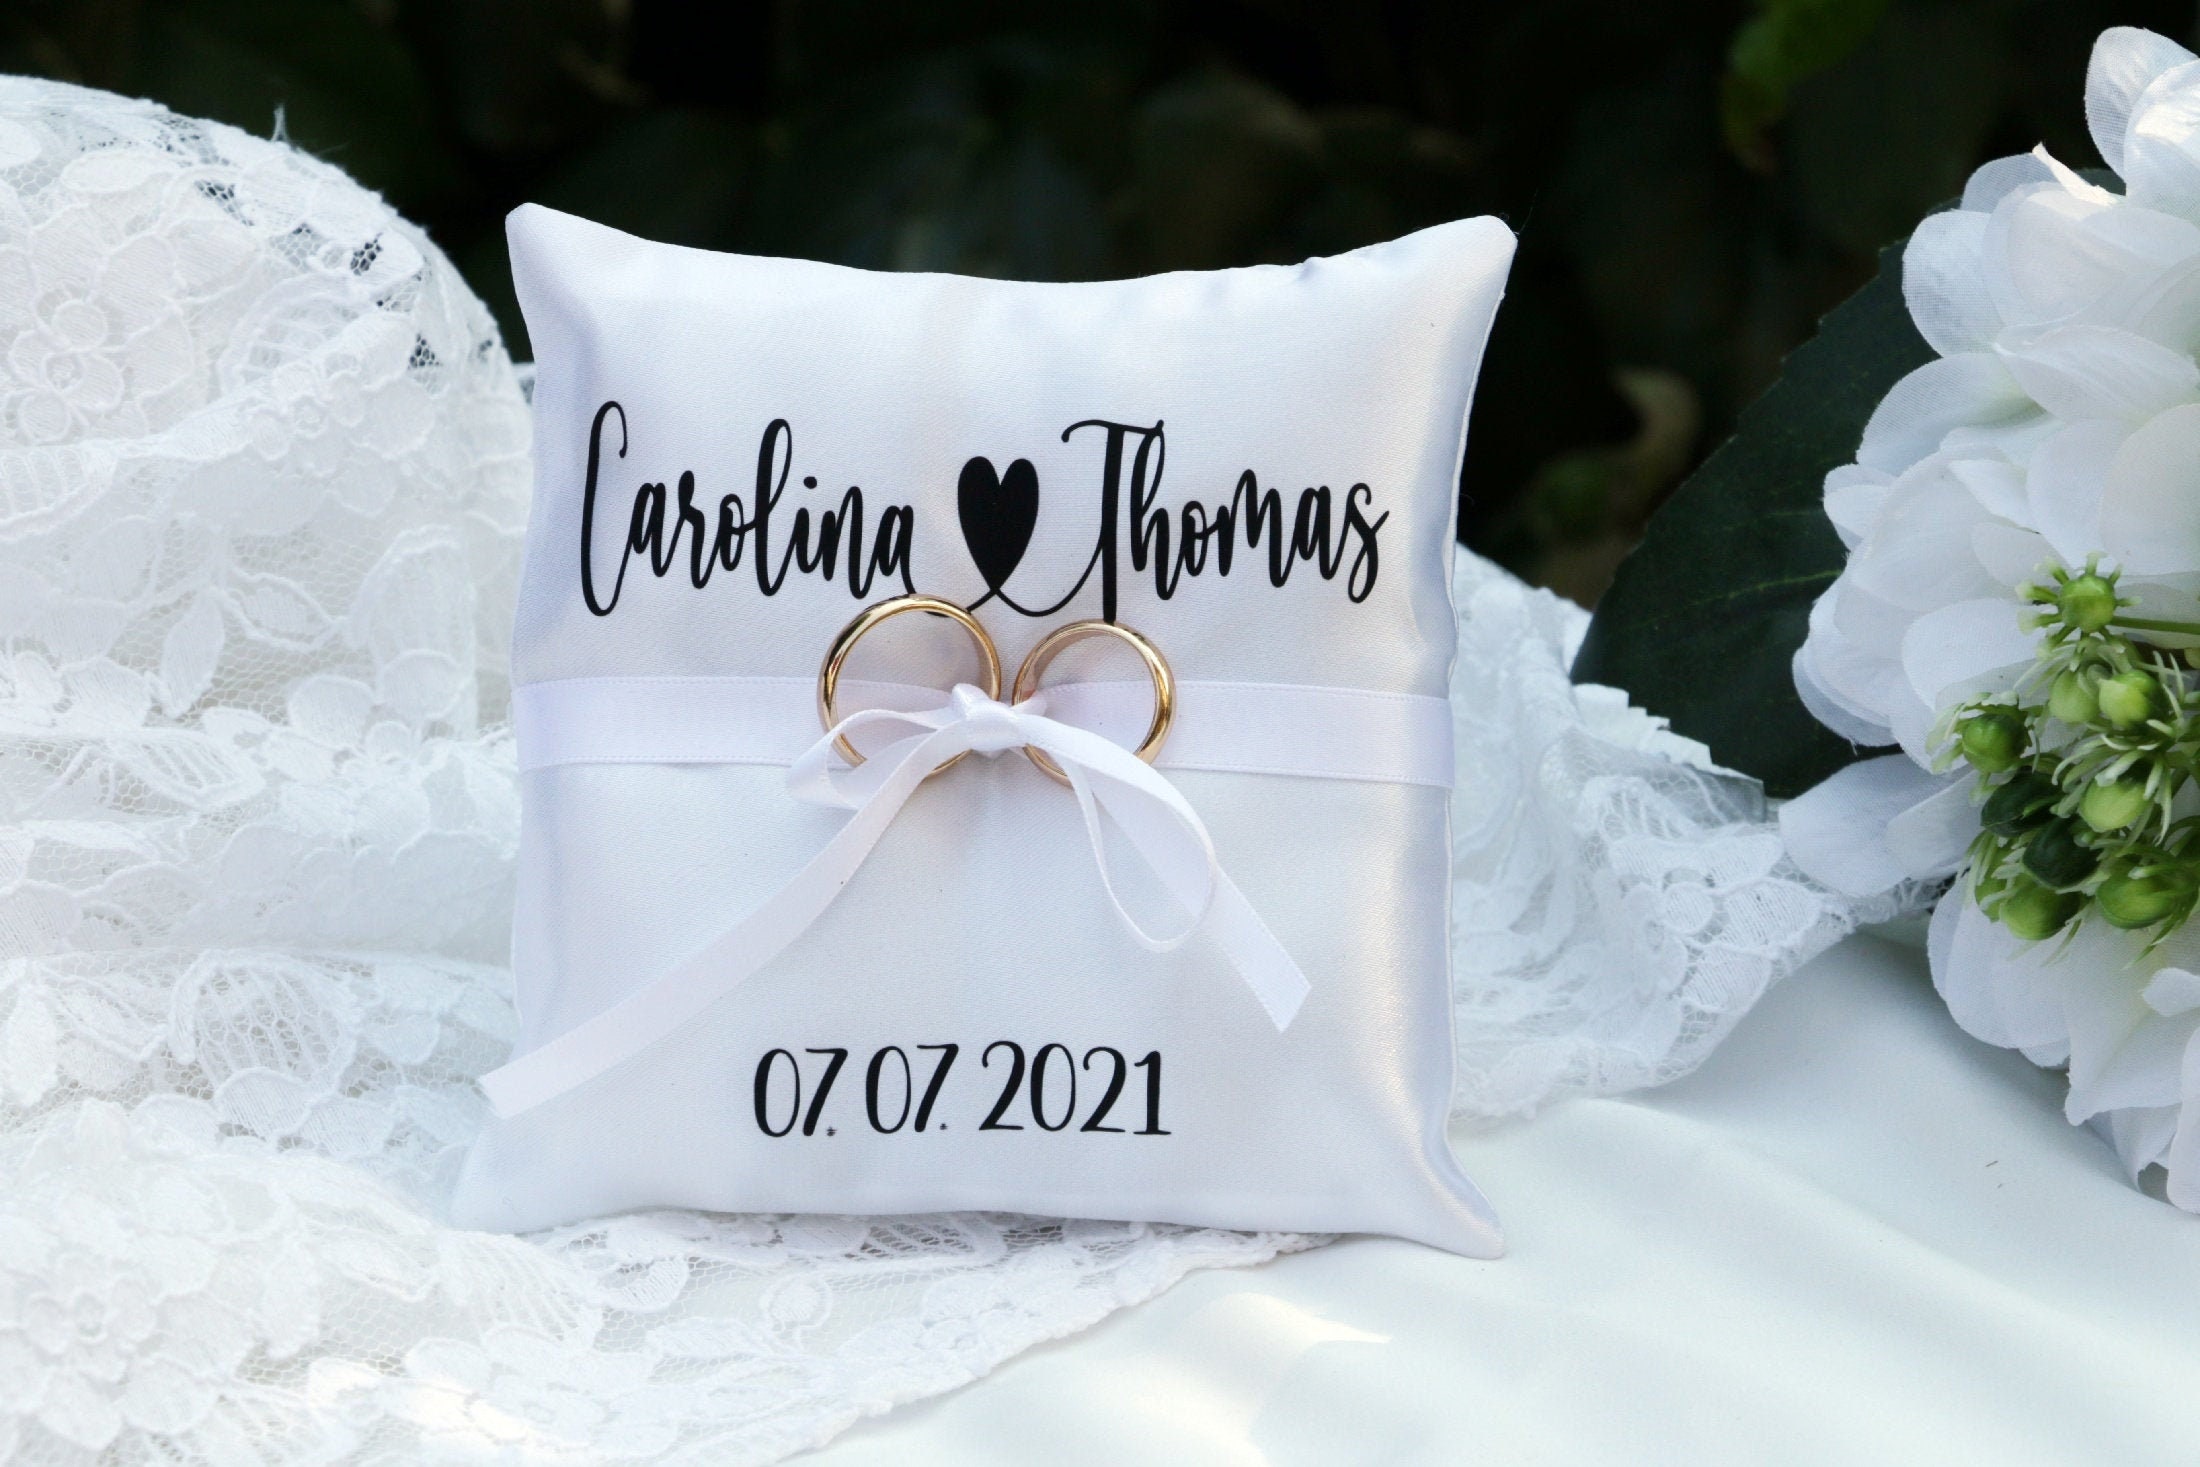 Buy Burlap 7.08*7.08 Inch Ring Bearer Pillows Lace Bow Flower Embroiled  Vintage Rustic Country Cushion Pearl Linen Ribbon Ring Bearer Pillows for  Wedding Ceremony Online at Low Prices in India - Amazon.in